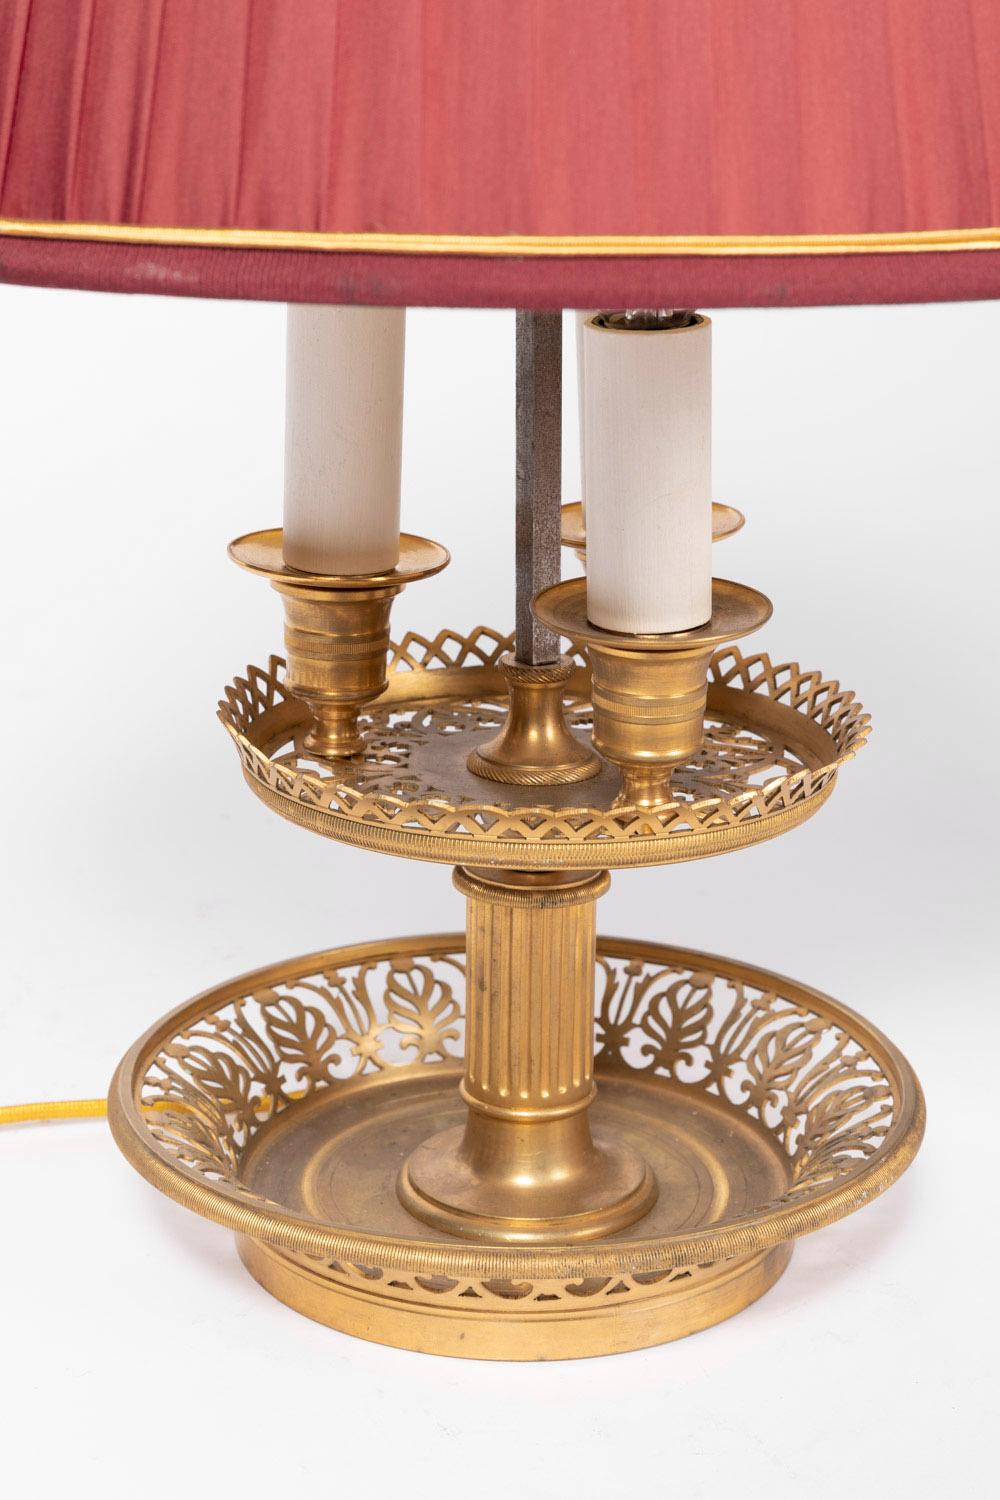 20th Century Restauration Style Bouillotte Lamp in Gilt Bronze, 1900 Period For Sale